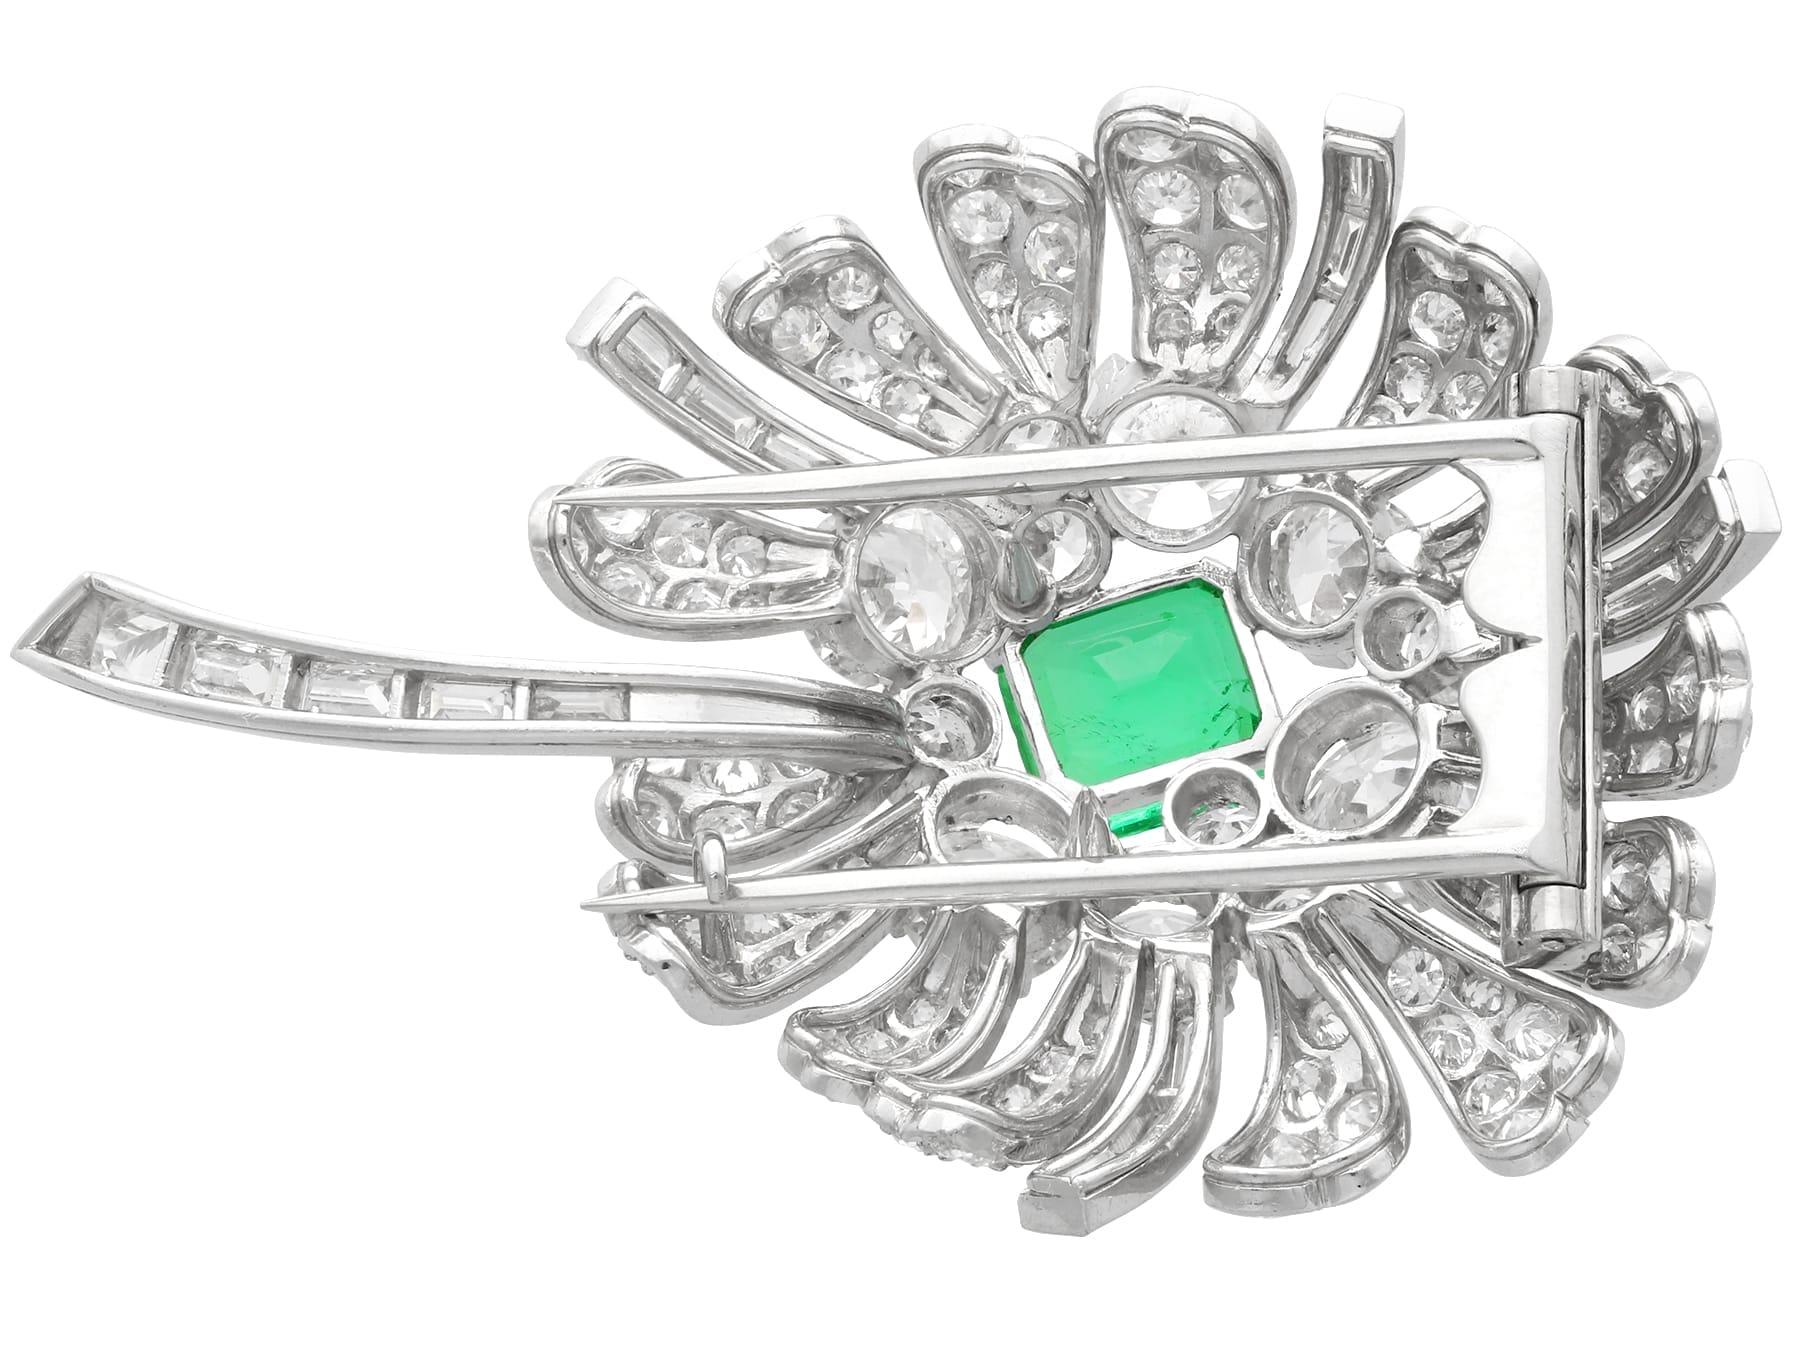 Antique 2.10Ct Emerald and 7.73Ct Diamond Platinum Floral Brooch Circa 1900 For Sale 1